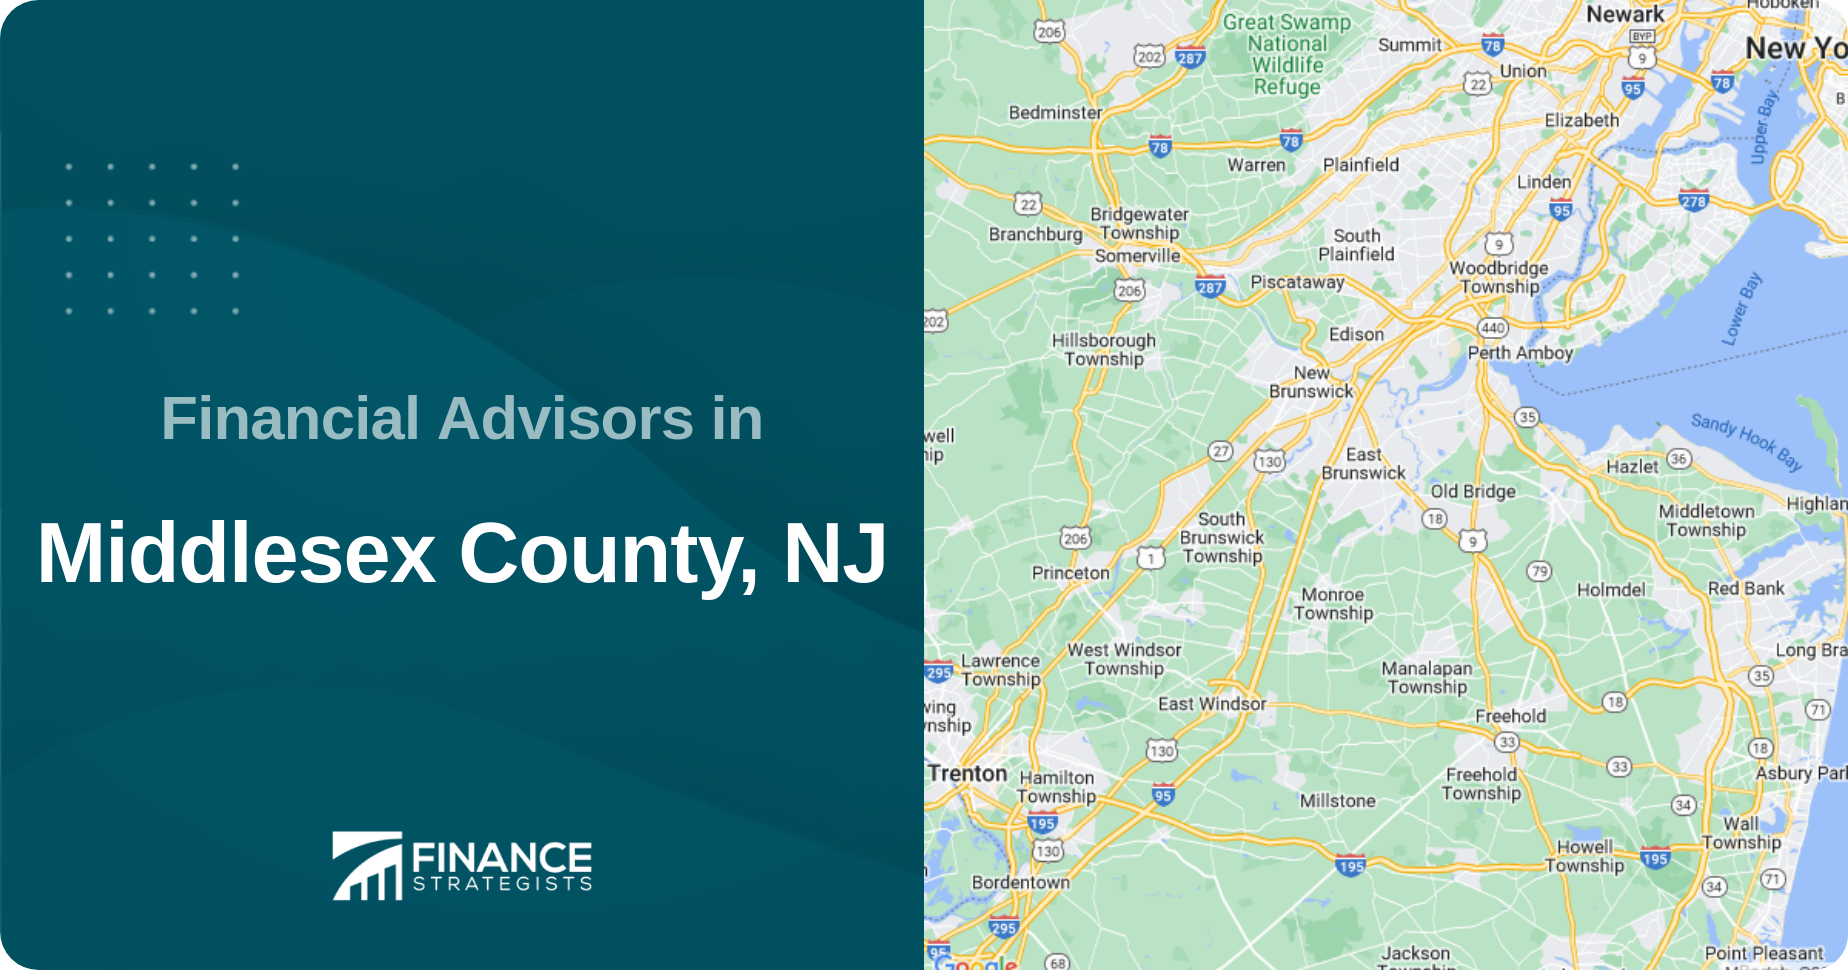 Financial Advisors in Middlesex County, NJ